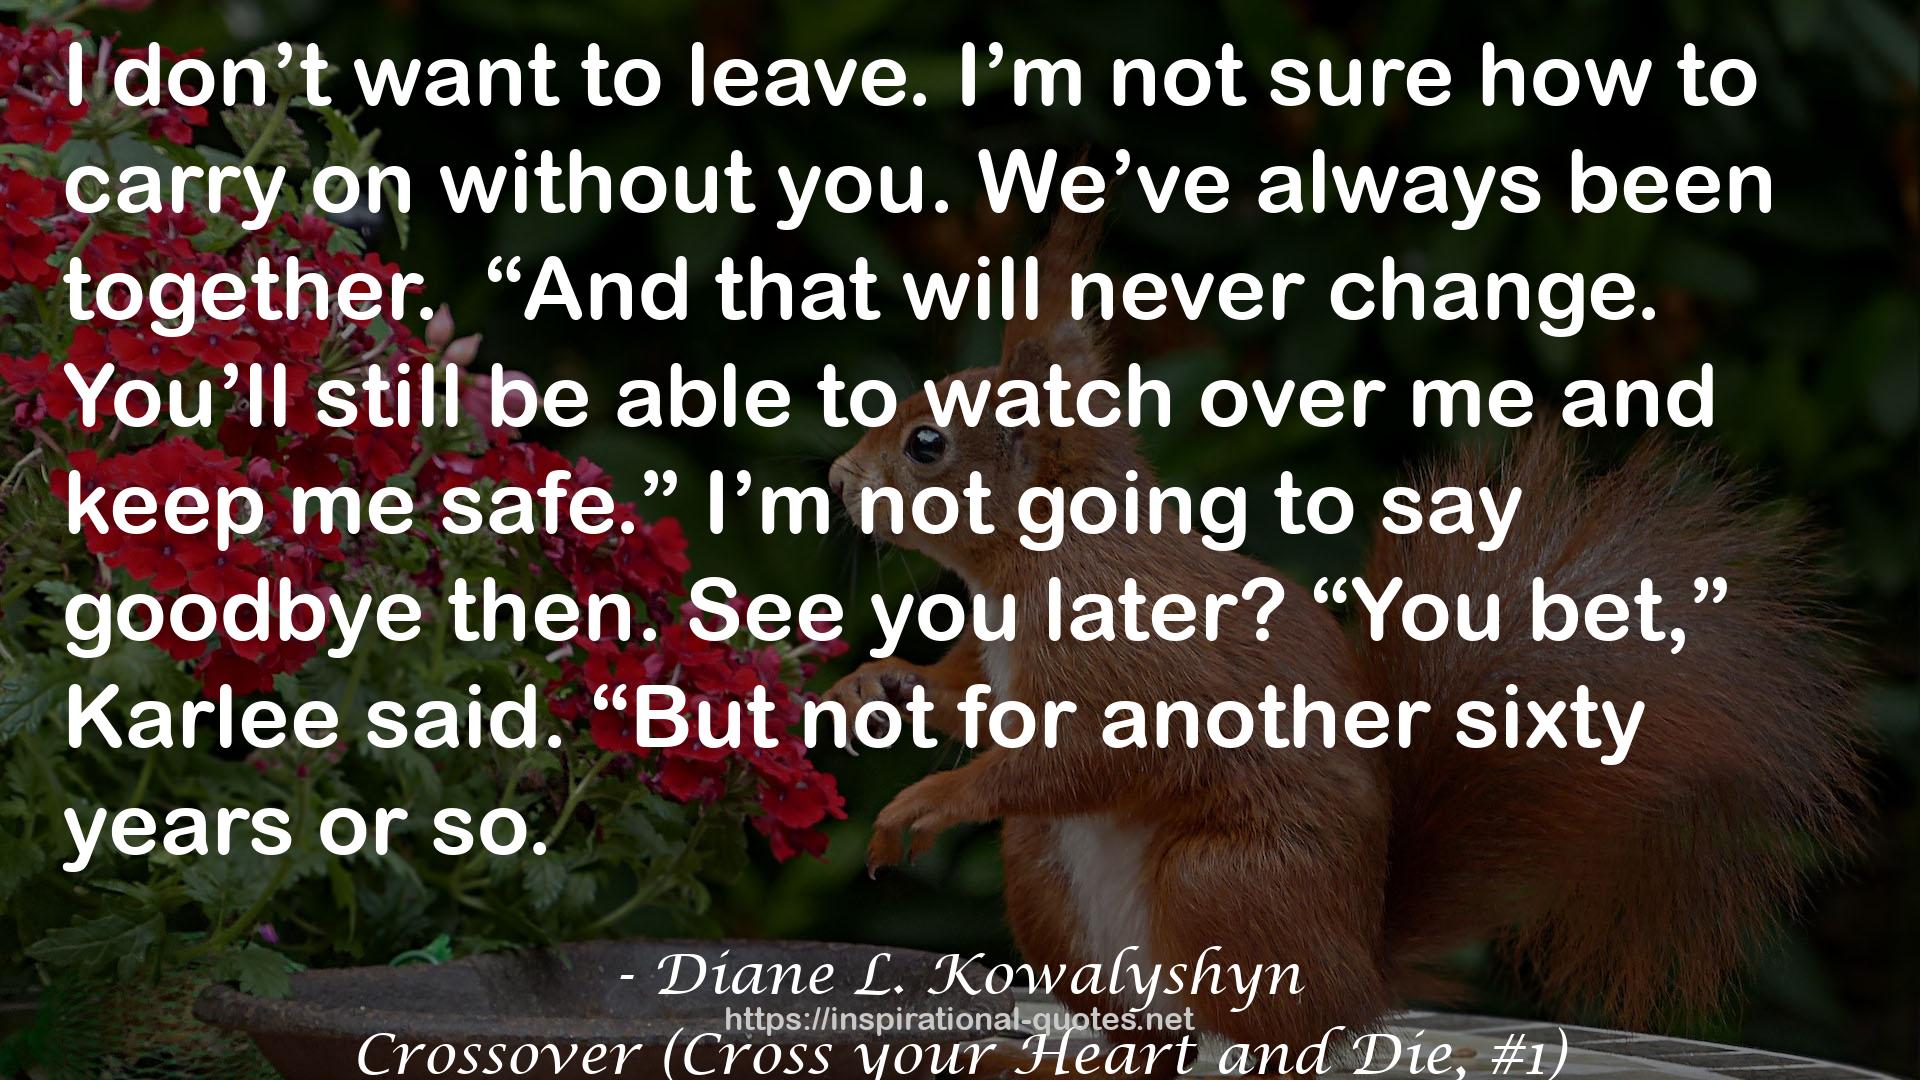 Crossover (Cross your Heart and Die, #1) QUOTES